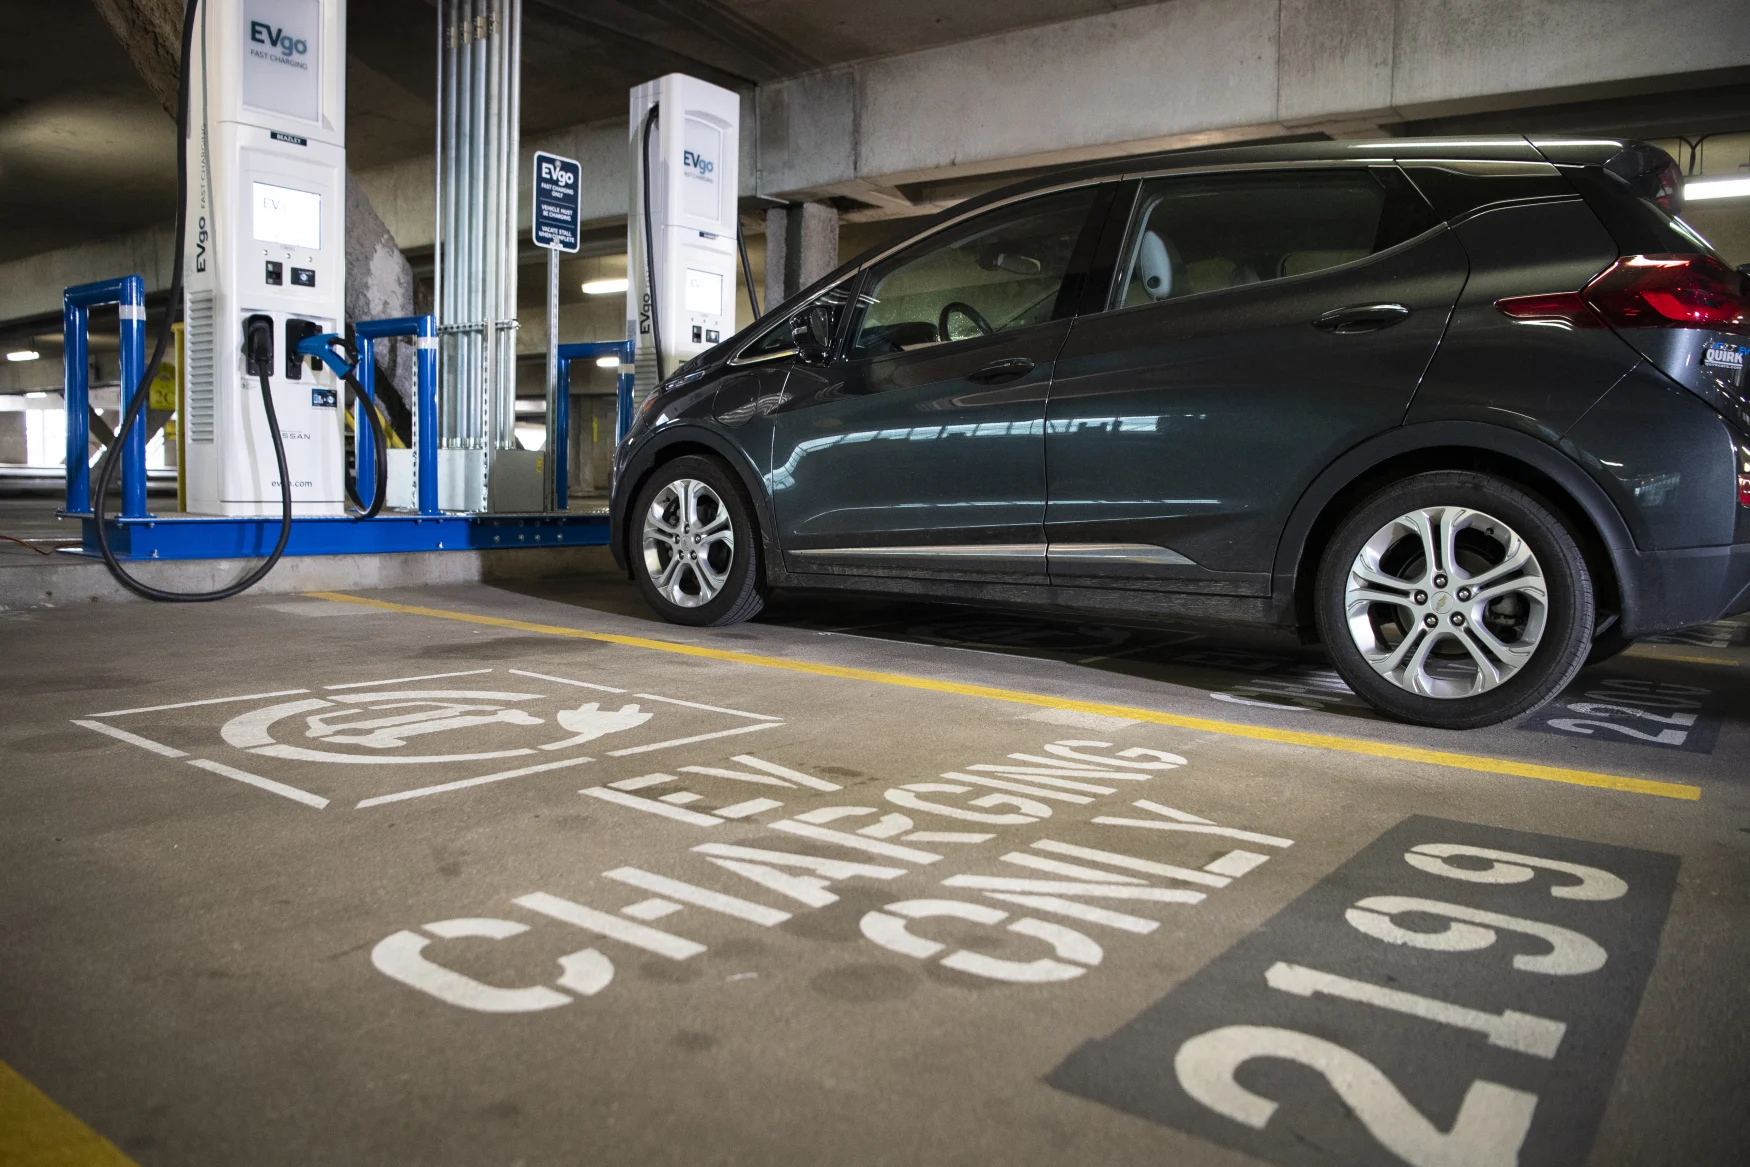 UNITED STATES - April 22: An EVgo charging station is pictured in the garage at Union Station in Washington on Thursday, April 22, 2021. (Photo by Caroline Brehman/CQ-Roll Call, Inc via Getty Images)